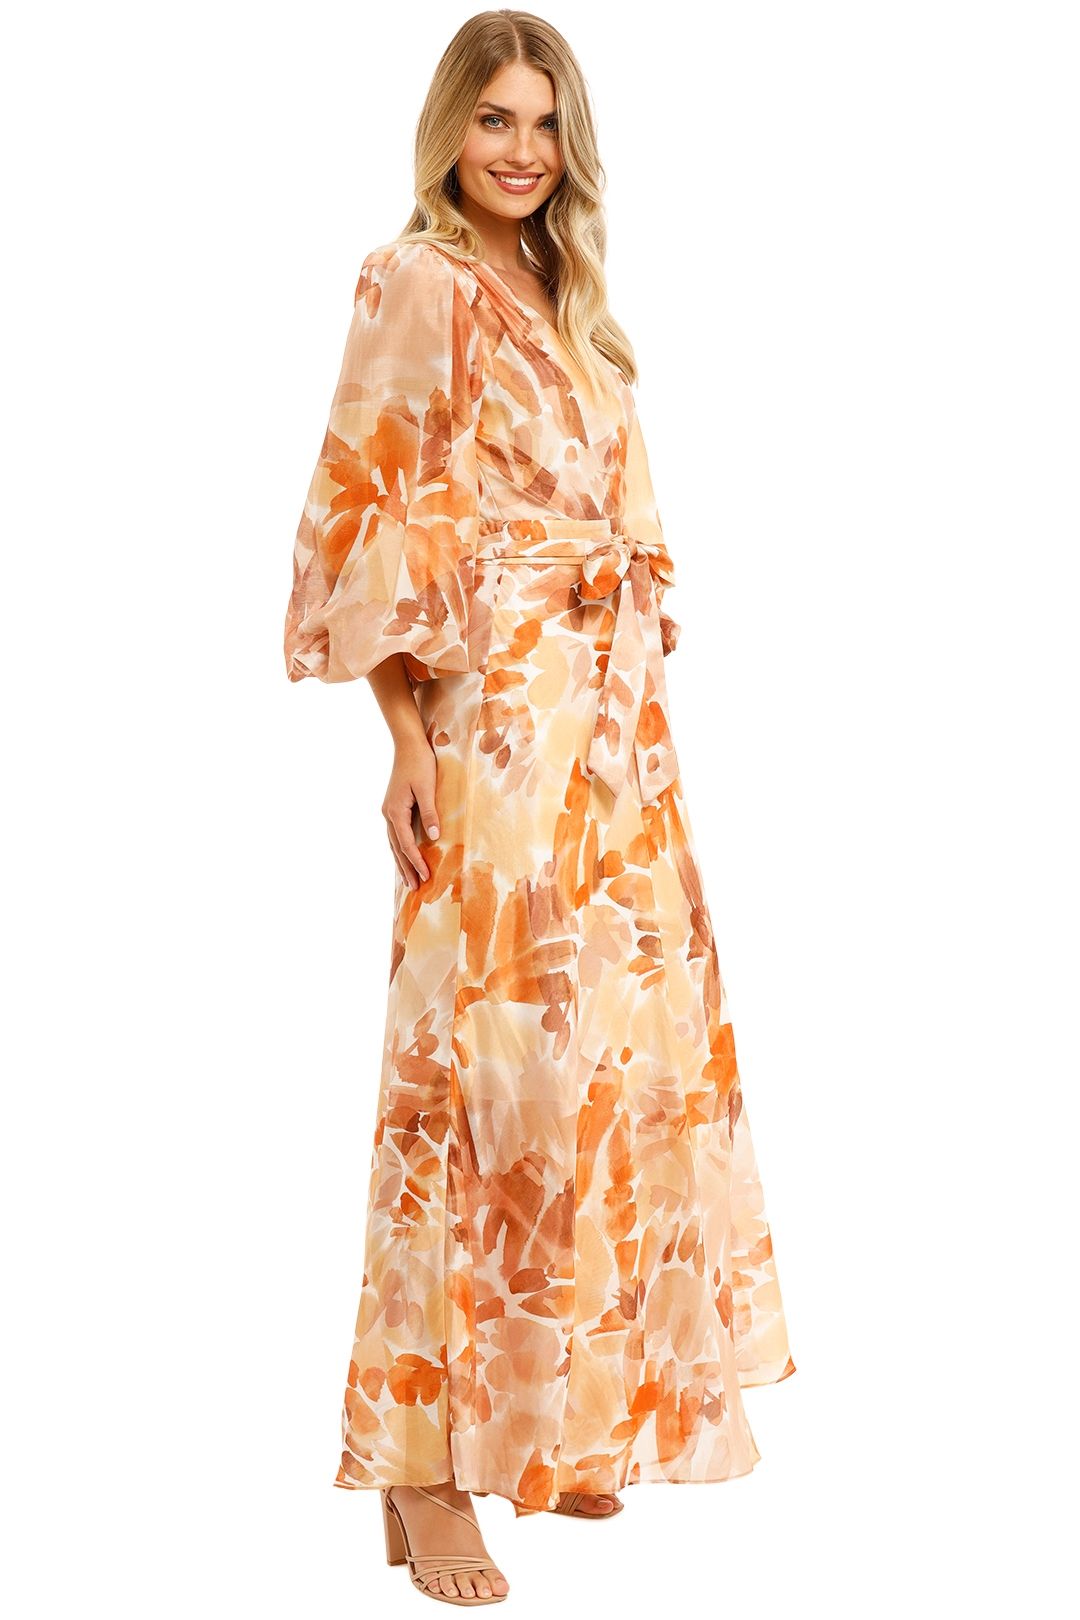 Ginger and Smart Sienna Wrap Dress maxi